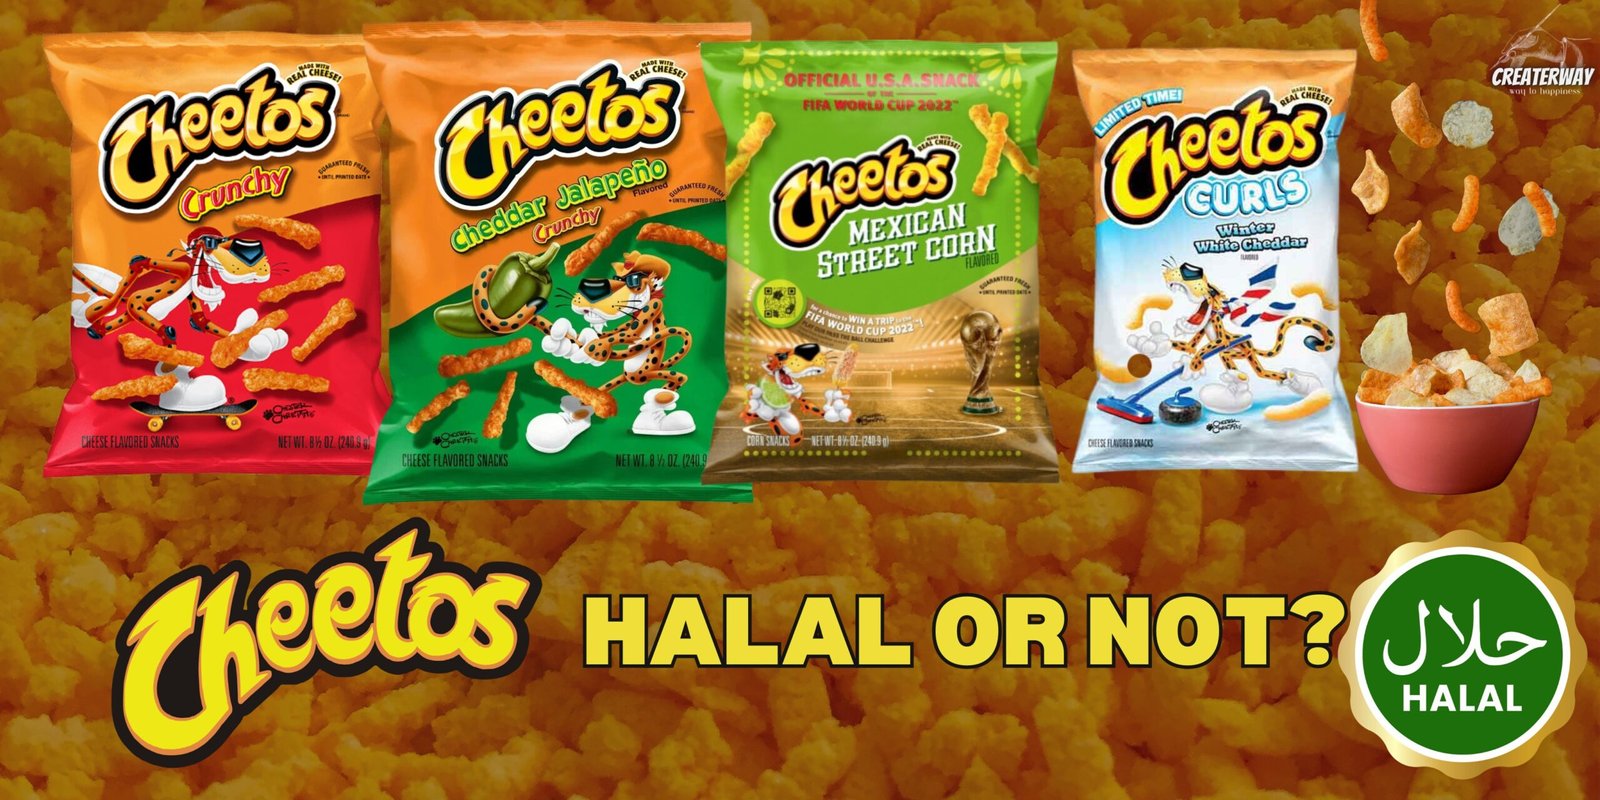 CHEETOS HALAL OR NOT BANNER WITH MULTIPLE CHEETOS PACKETS WITH THIER NAMES